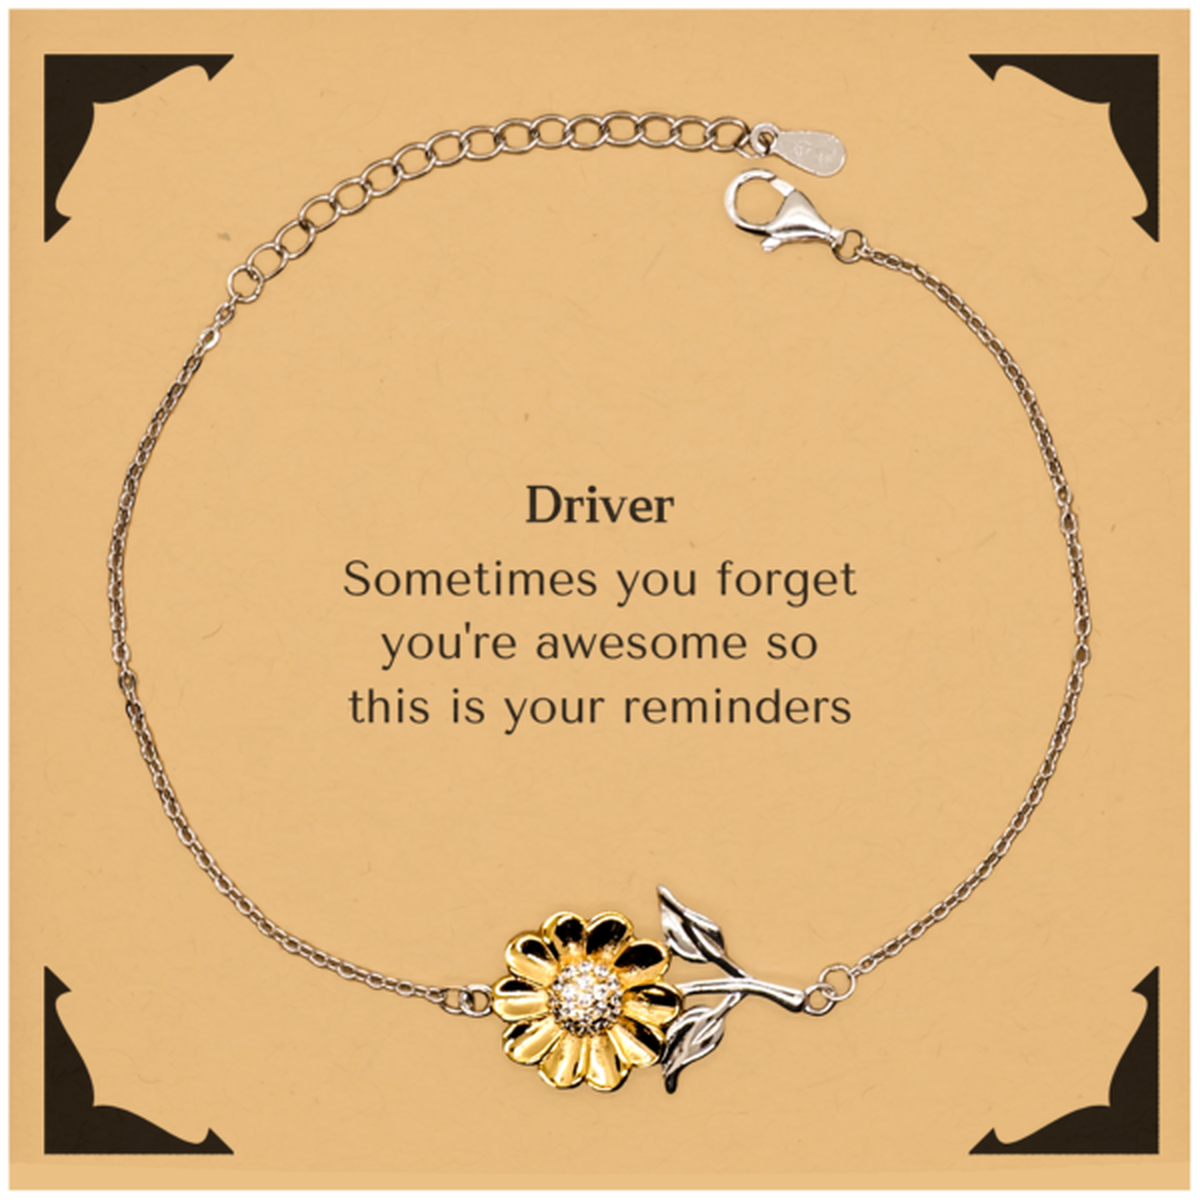 Sentimental Driver Sunflower Bracelet, Driver Sometimes you forget you're awesome so this is your reminders, Graduation Christmas Birthday Gifts for Driver, Men, Women, Coworkers